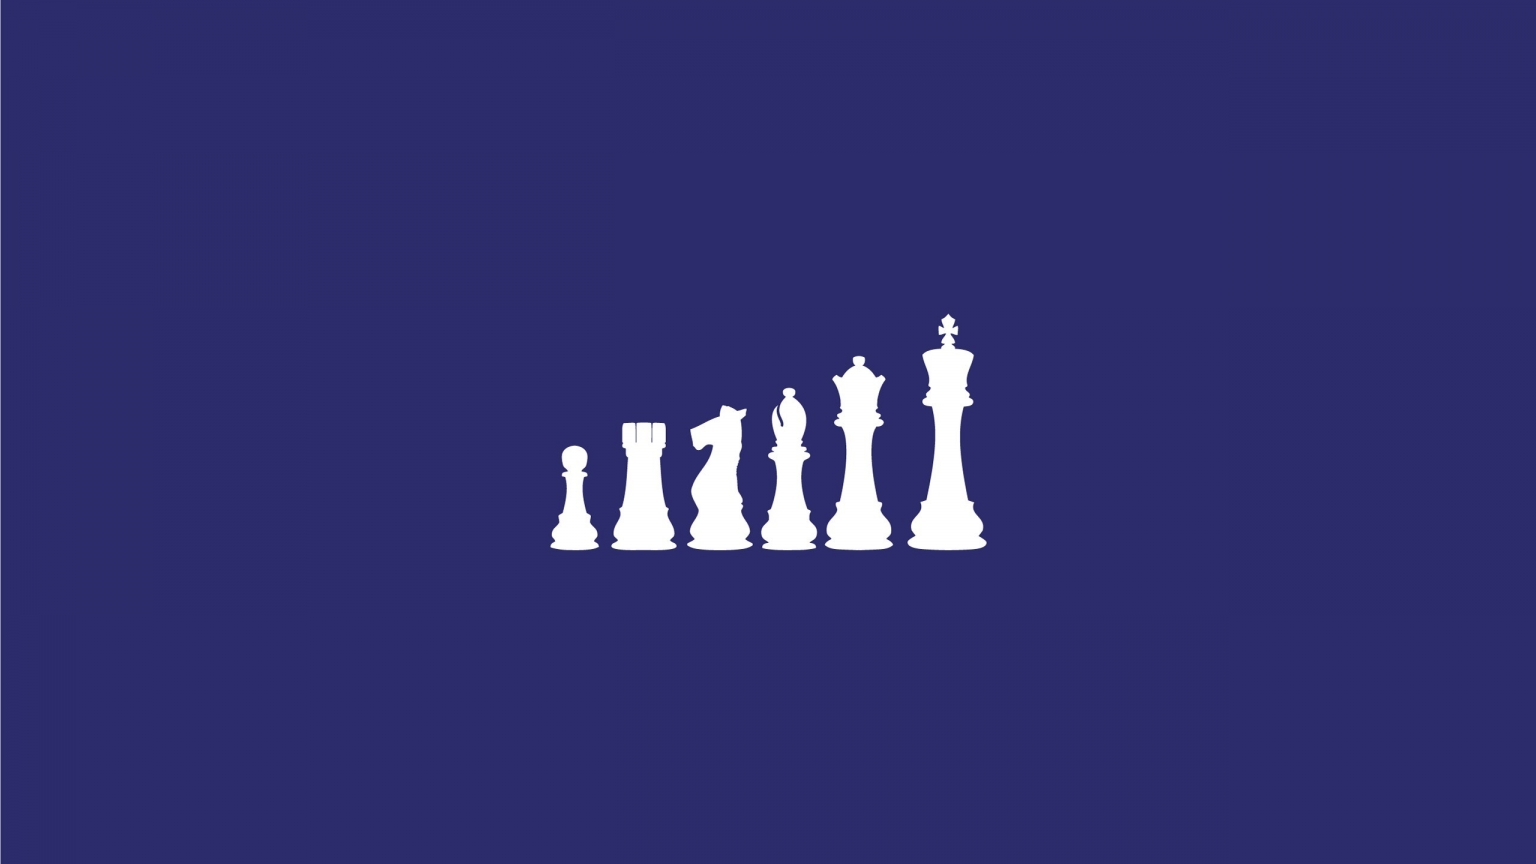 Chess Figures for 1536 x 864 HDTV resolution